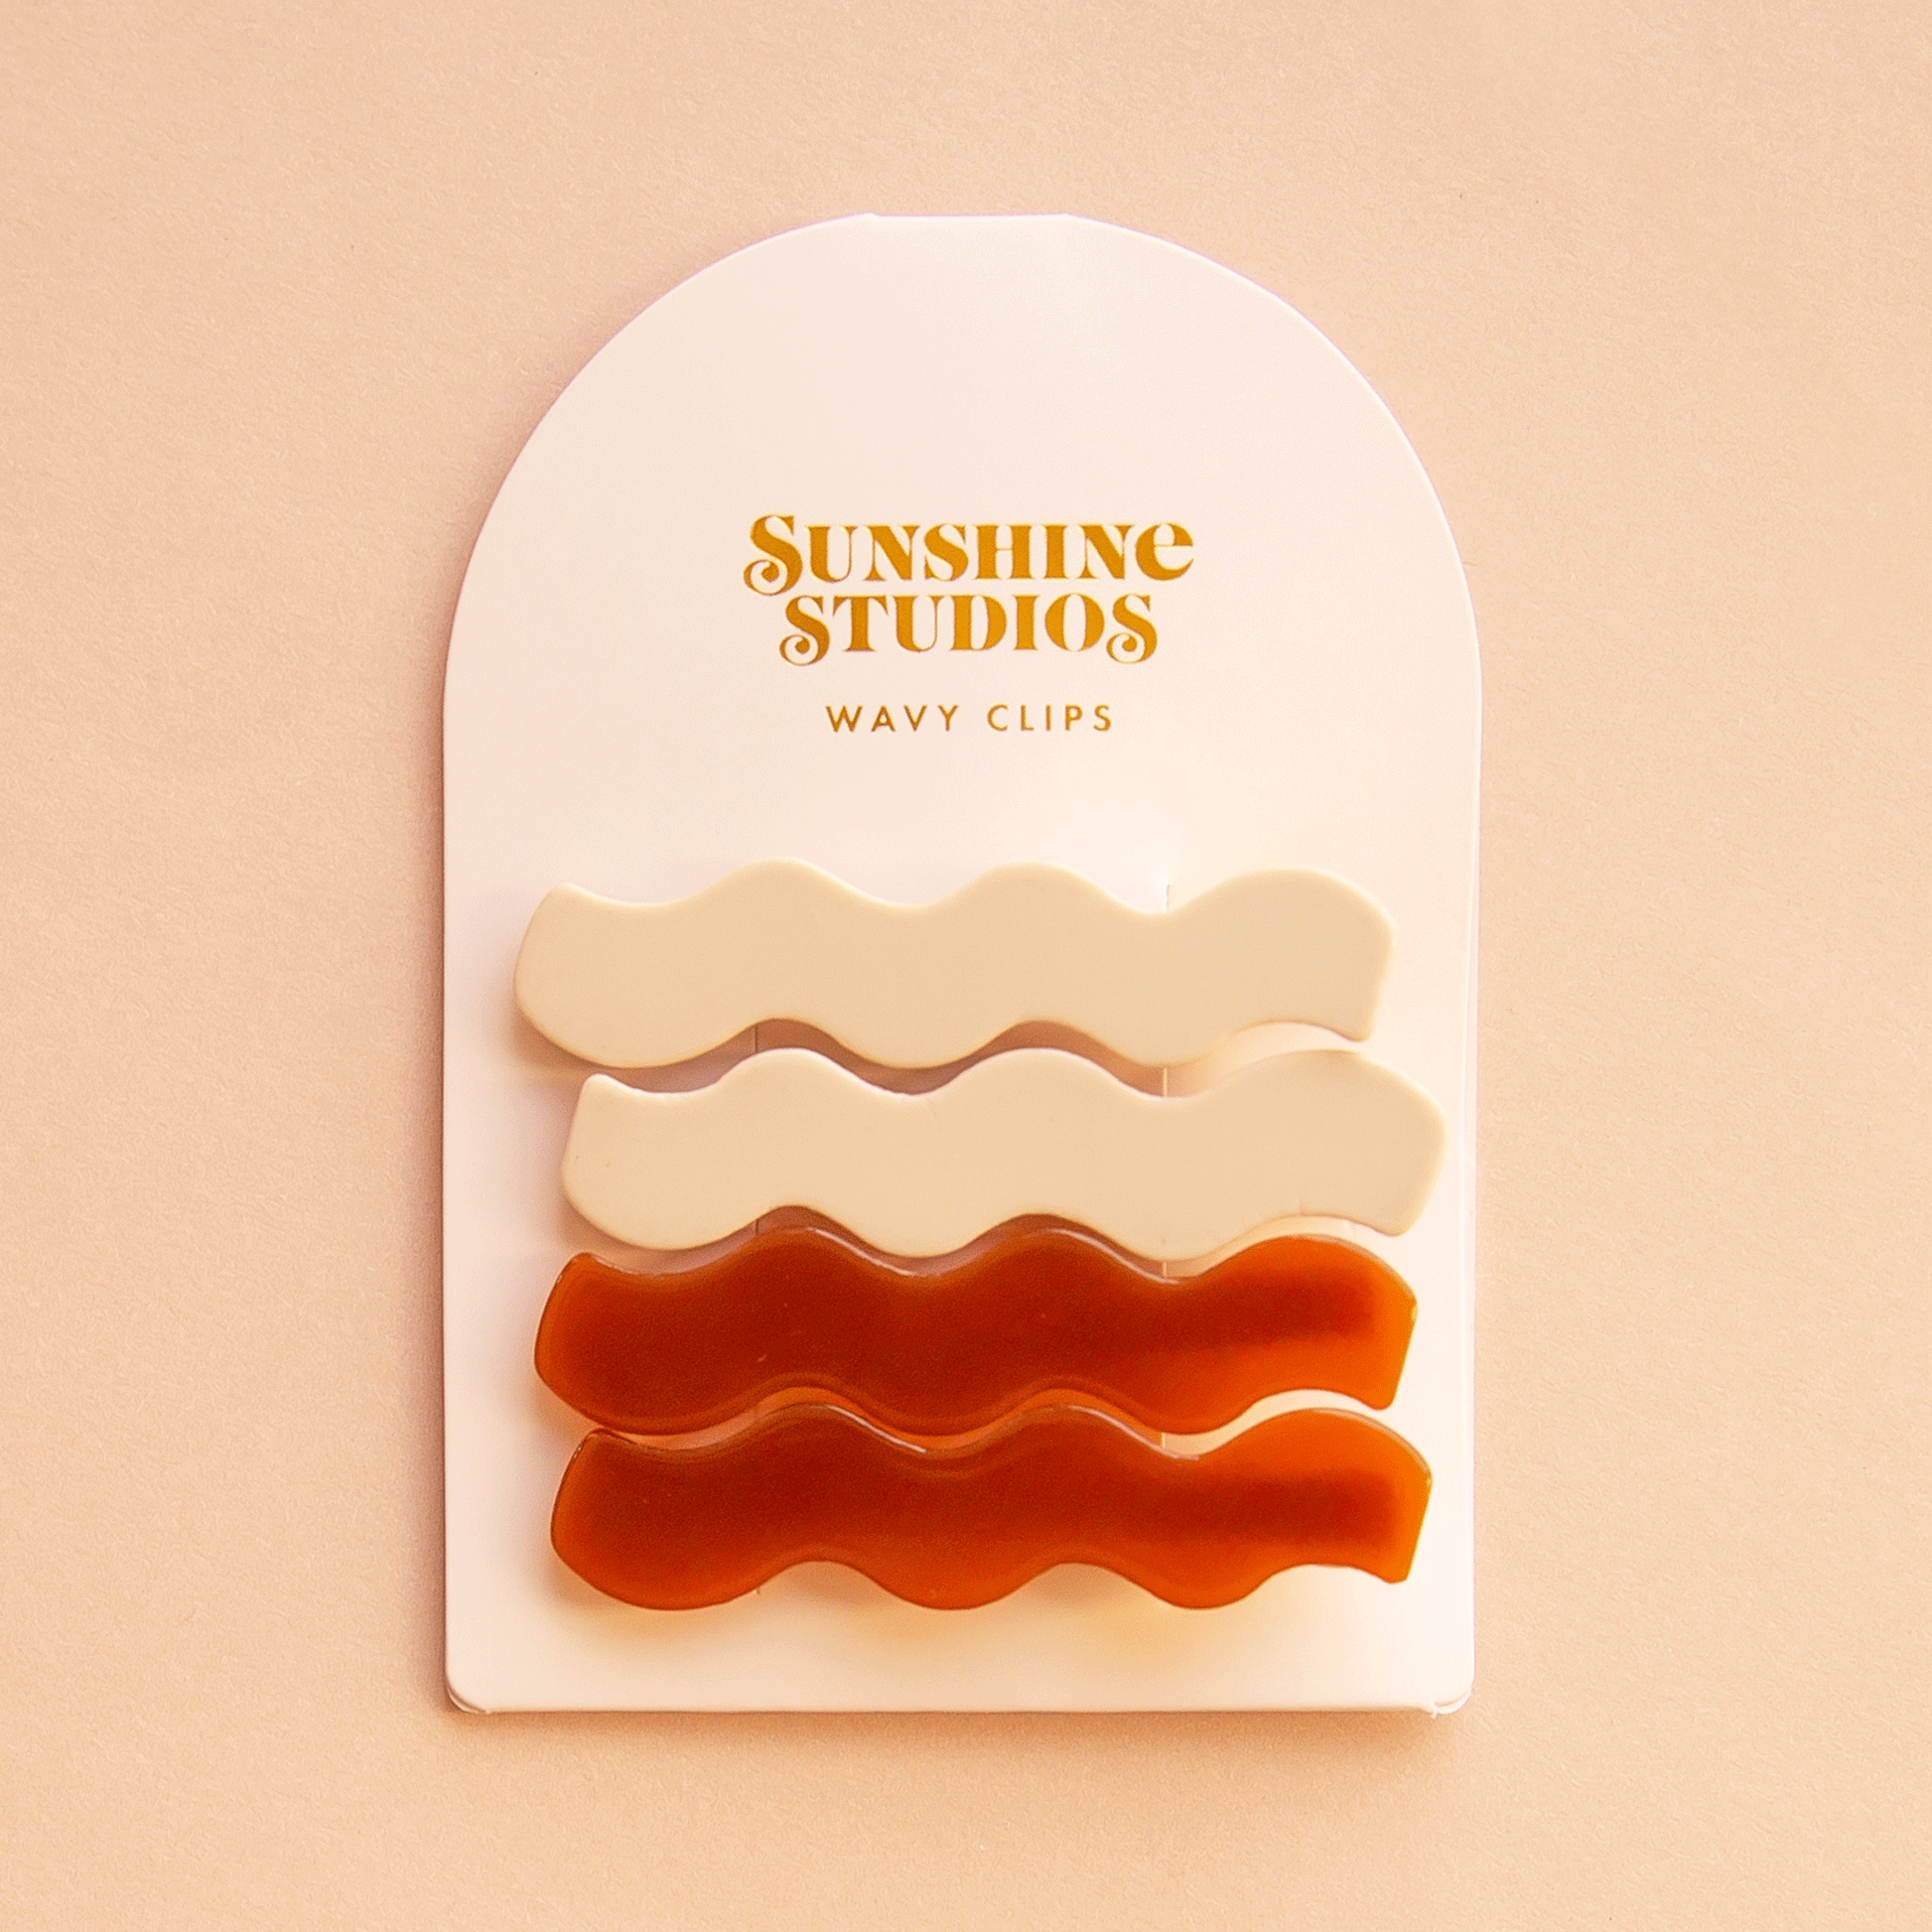 On a peach background is two pairs of wavy hair clips on a white arched cardboard backing with text at the top that reads, "Sunshine Studios Wavy Clips".